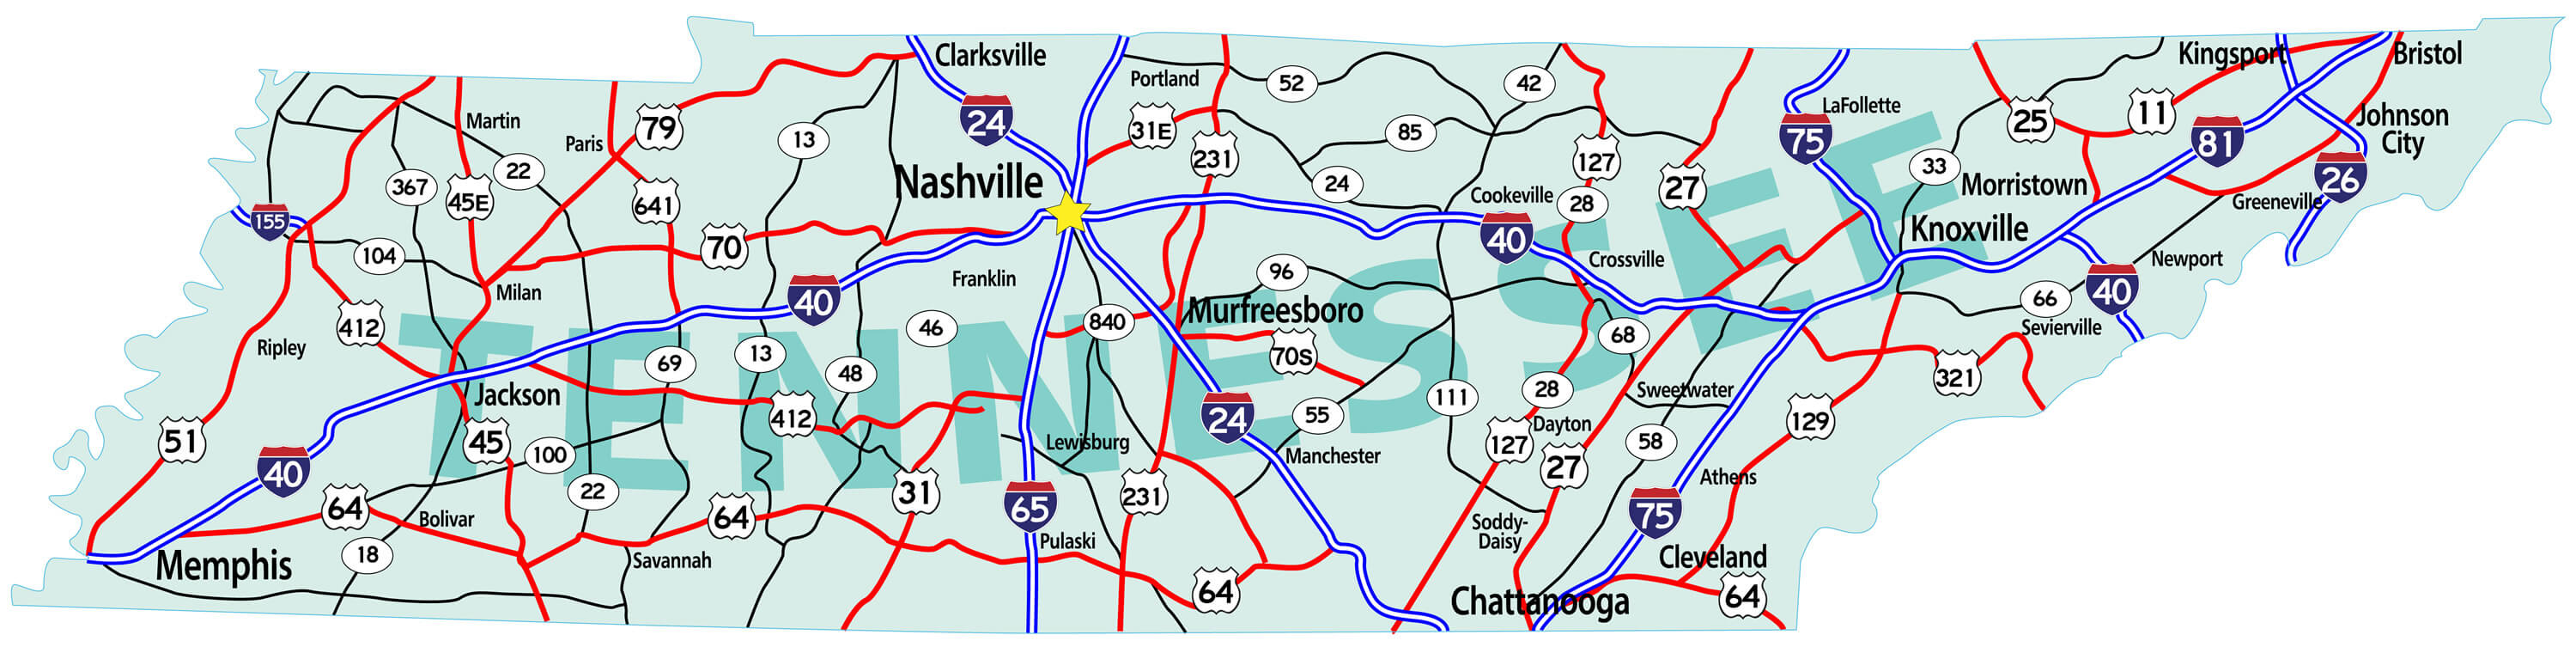 Tennessee state road map